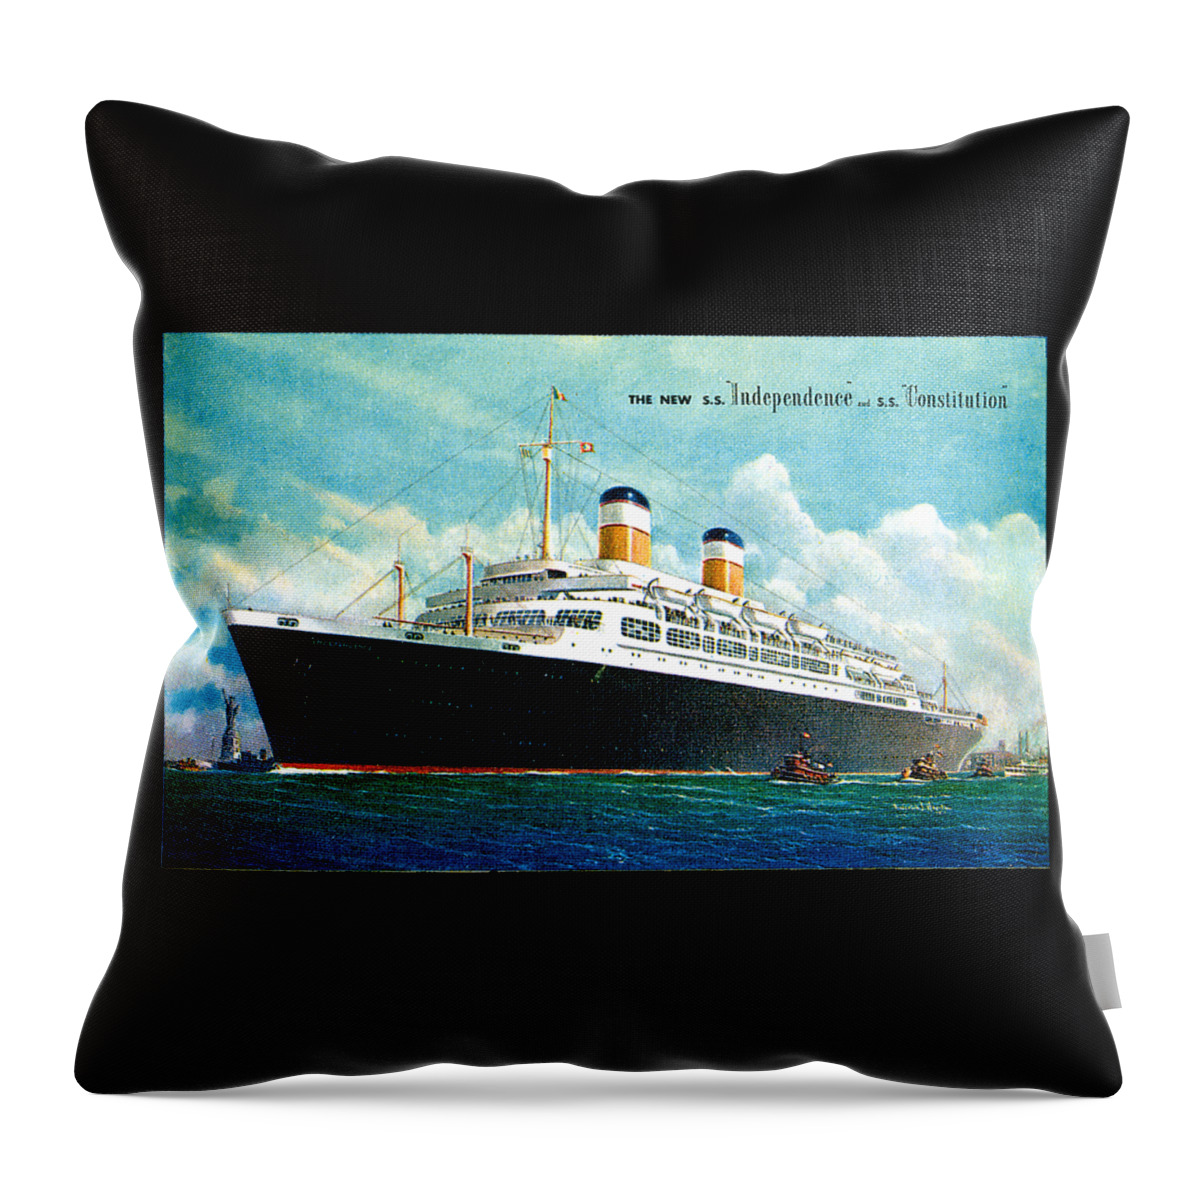 Uss Throw Pillow featuring the painting USS Independence SS Constitution Postard 1951 by Unknown